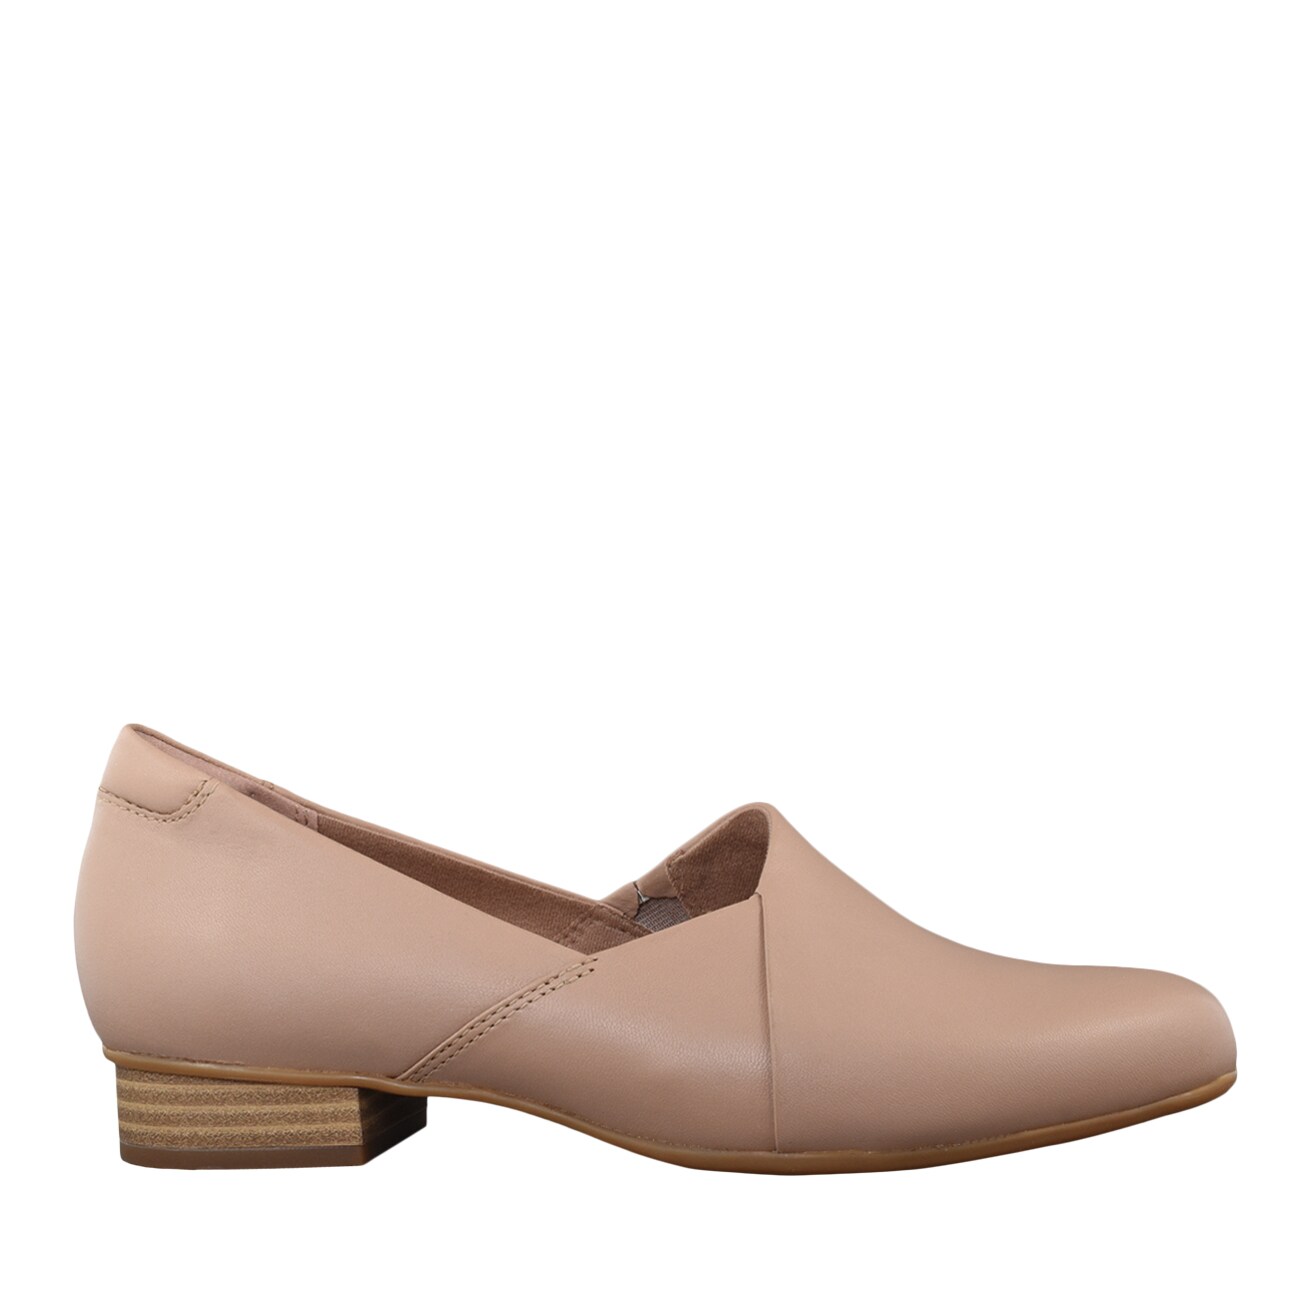 clarks collection women's juliet palm loafers